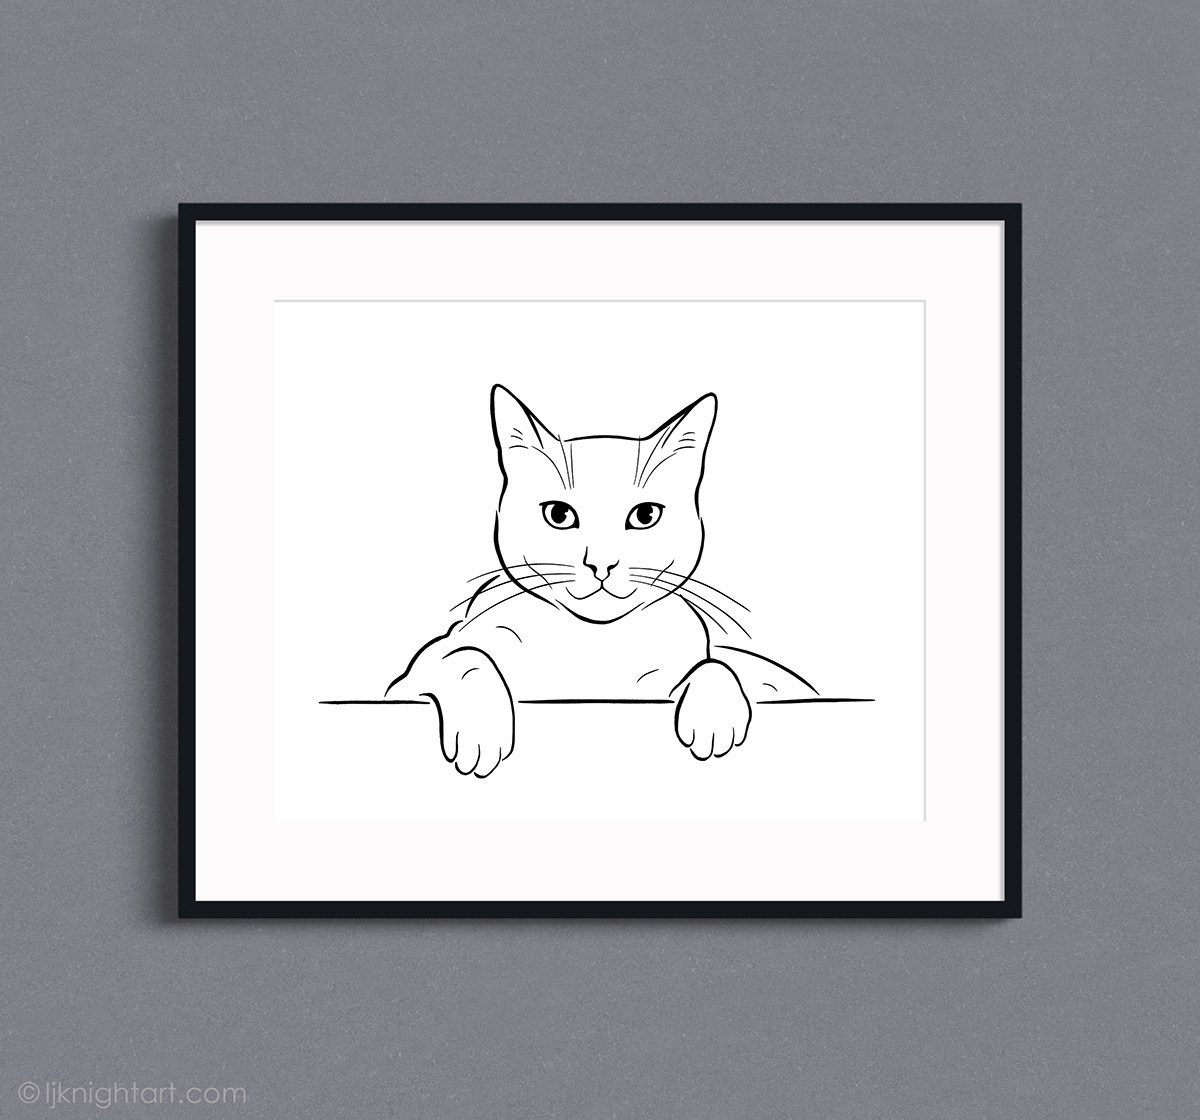 25 Easy Cat Drawing Ideas and Tutorials for Everyone - Beautiful Dawn  Designs | Cats art drawing, Realistic cat drawing, Pencil drawings of  animals